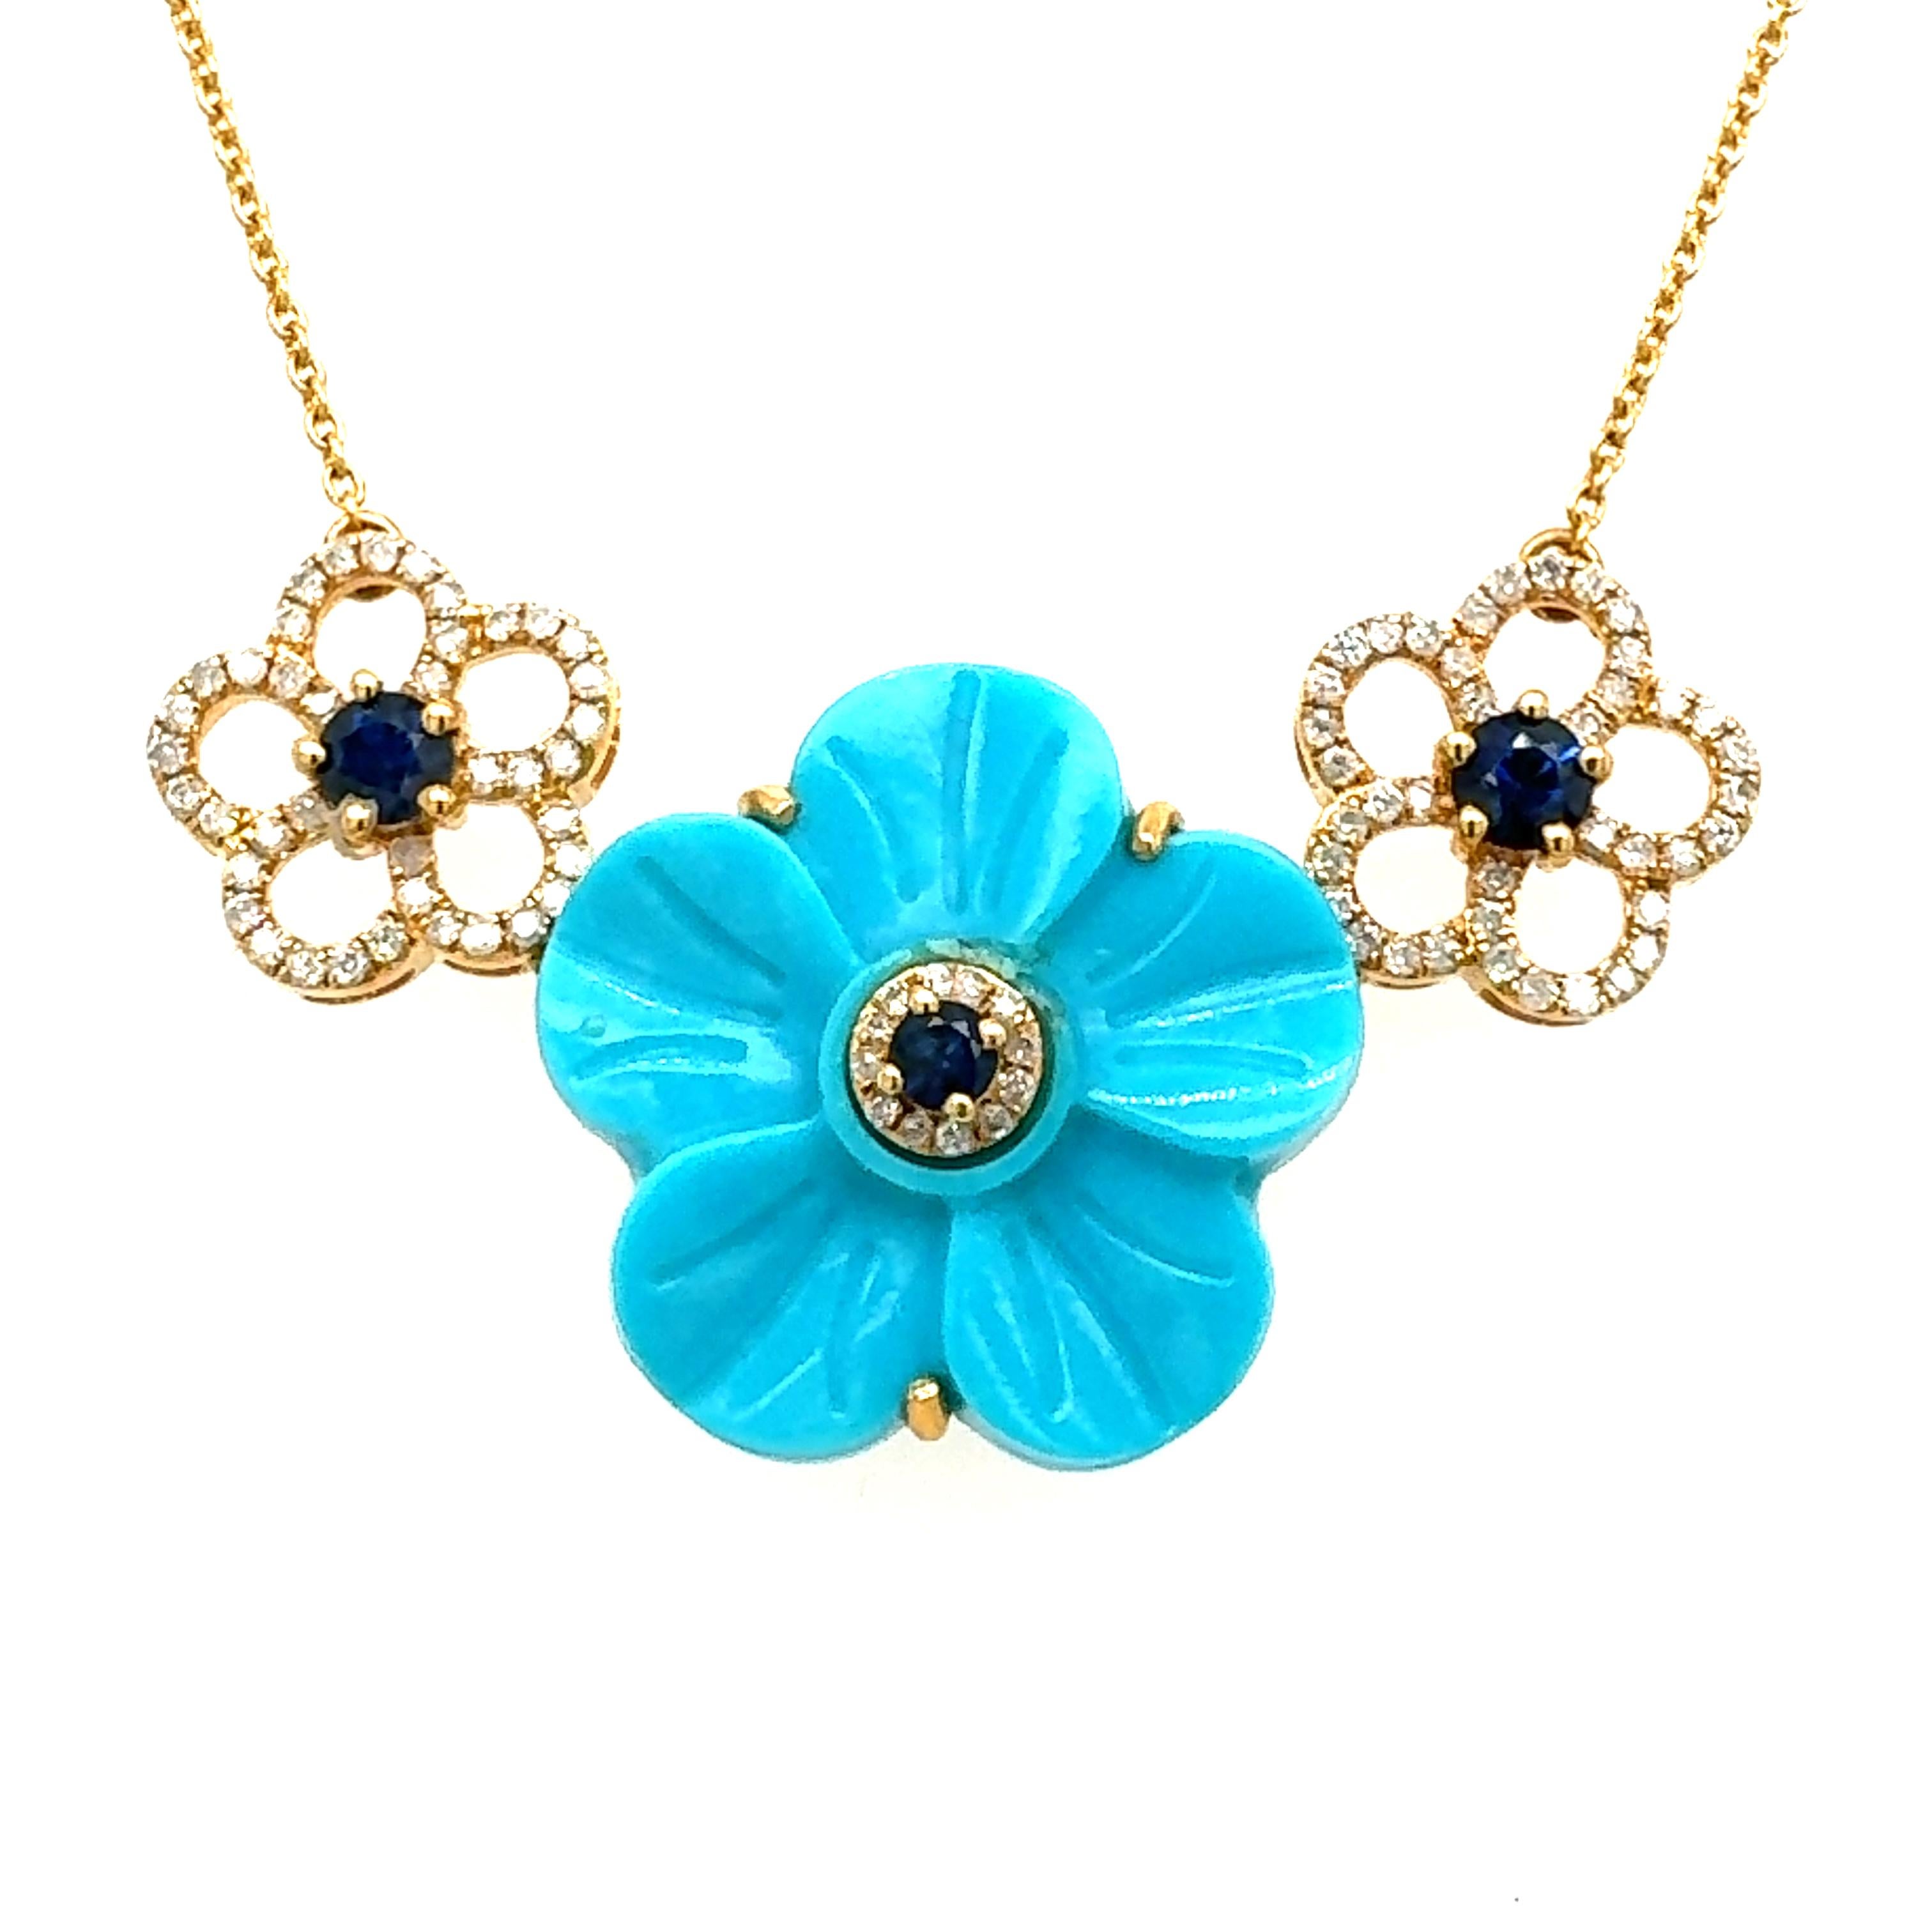 An gorgeous flower design necklace made of 18-karat yellow gold, set with a natural 18.28-carat Turquoise, 0.40-carat sapphire and 0.33-carat diamonds . You are able to change the necklace's length as well. The necklace is 18 inches long, but you